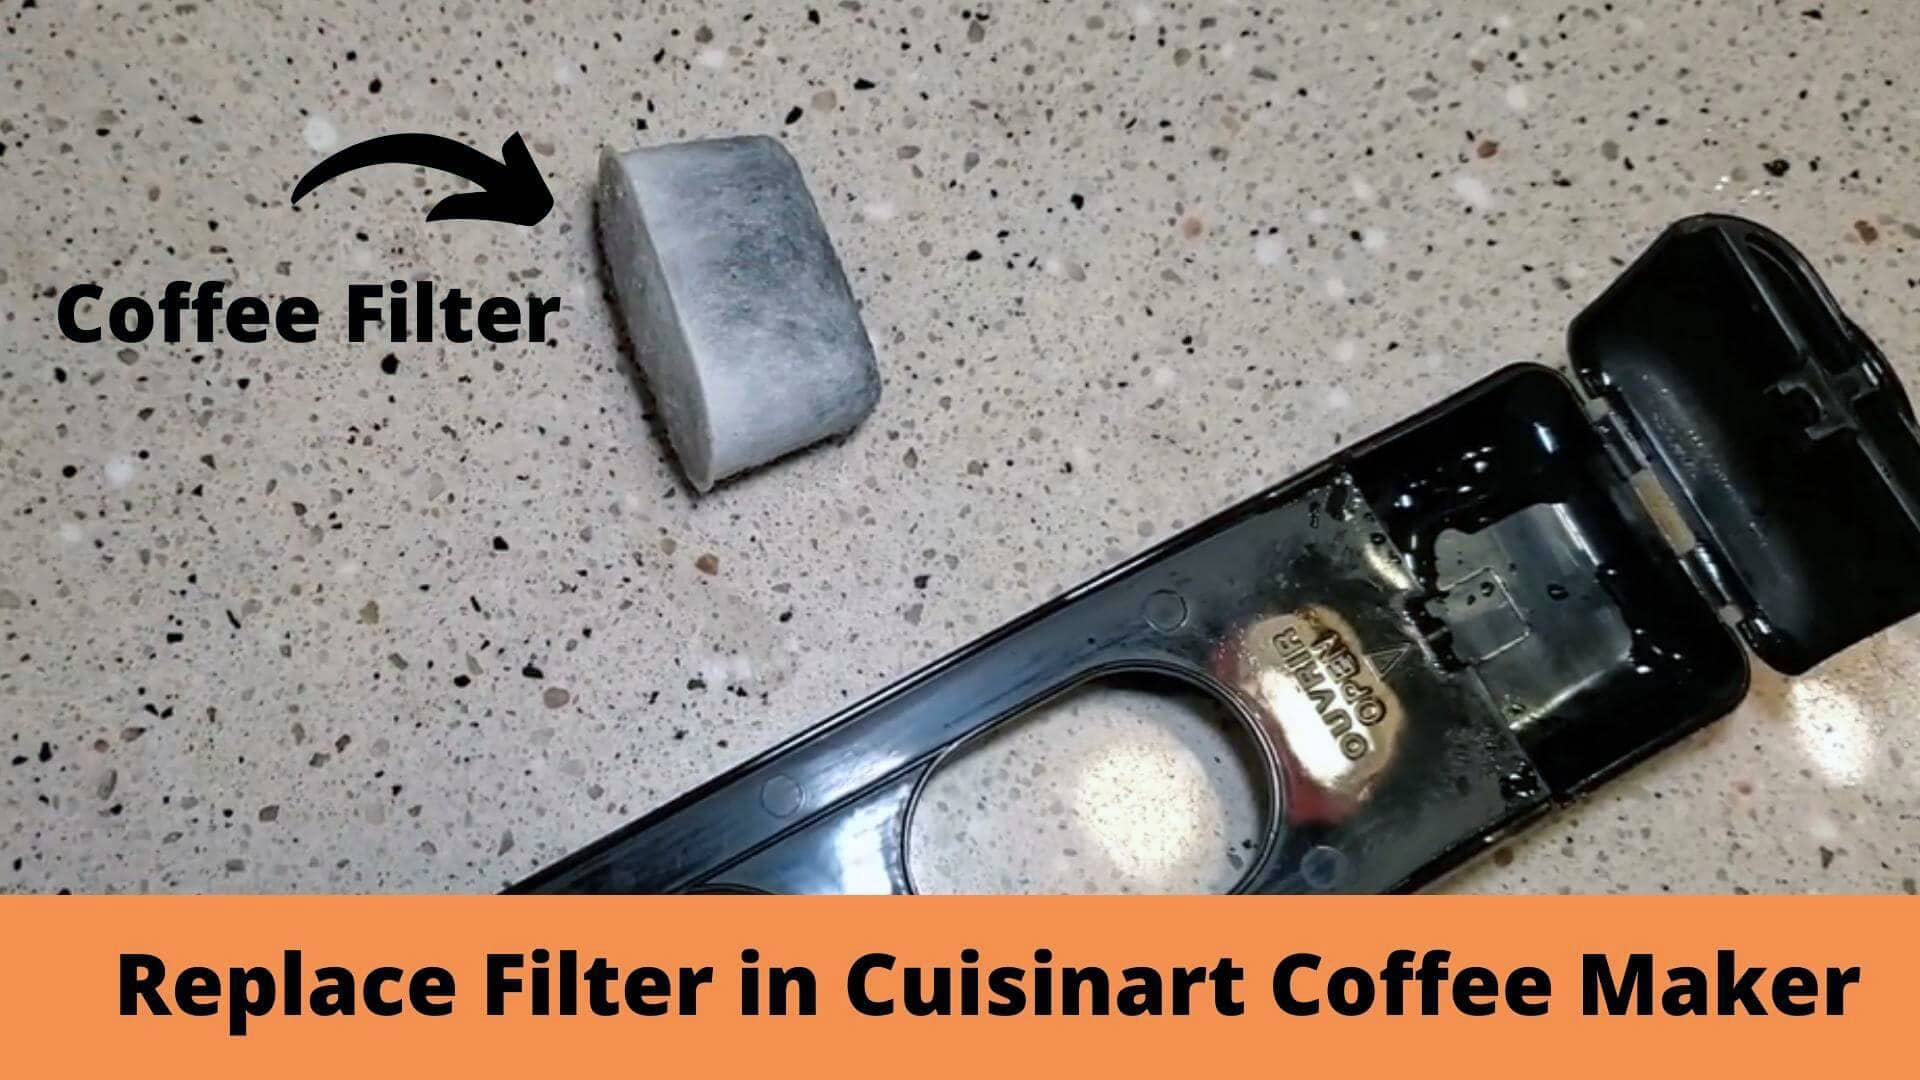 How to Replace Filter in Cuisinart Coffee Maker